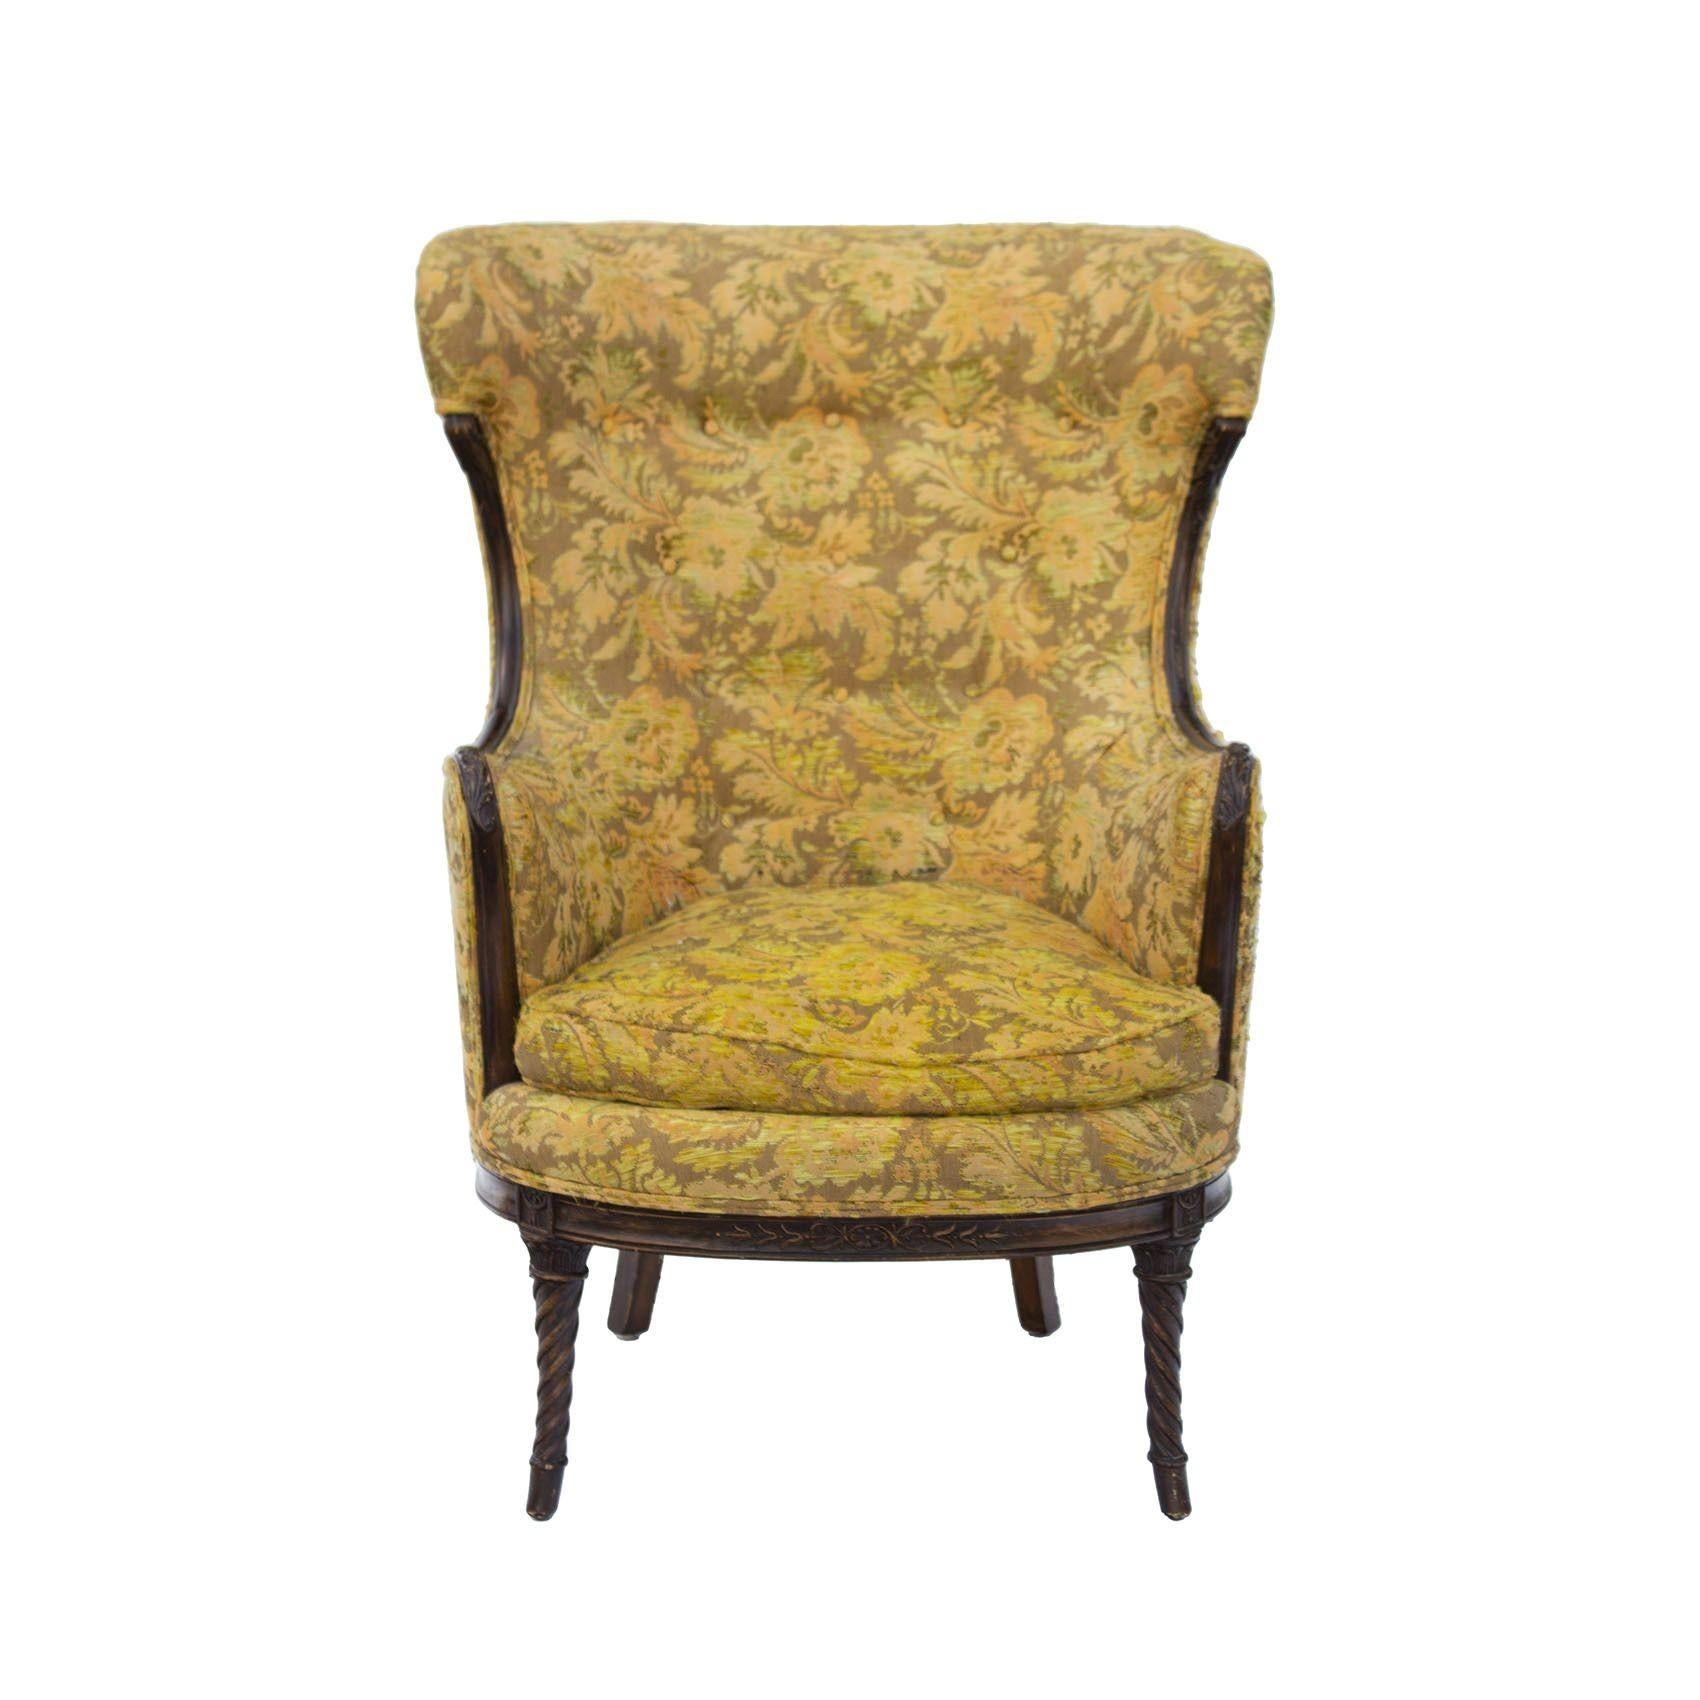 USA, 1930s
Elegant wing chair with carved wooden frame. It's a great style with a lot of visual interest, yet enveloping and comfortable. 
CONDITION NOTES: Chair is in original condition and restoration is recommended. Frame is structurally sound